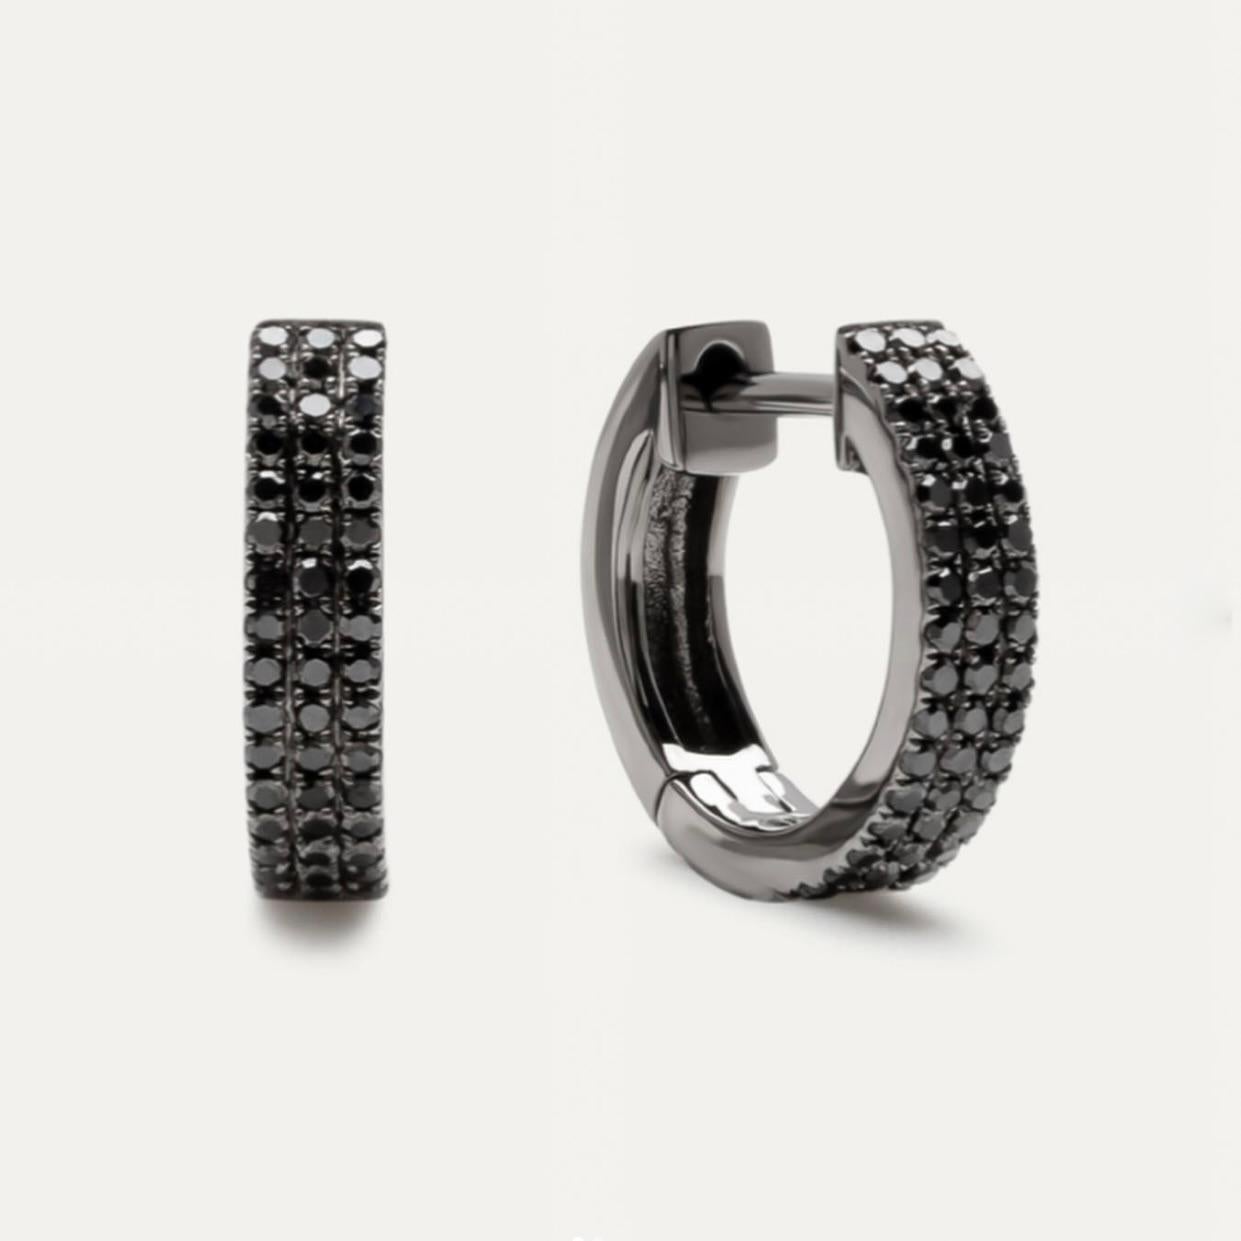 Double Row Black Diamond Huggies are a mesmerizing and edgy variation of classic hoop earrings. These captivating hoops feature two rows of brilliant black diamonds meticulously set in a closely spaced arrangement, creating a stunning contrast